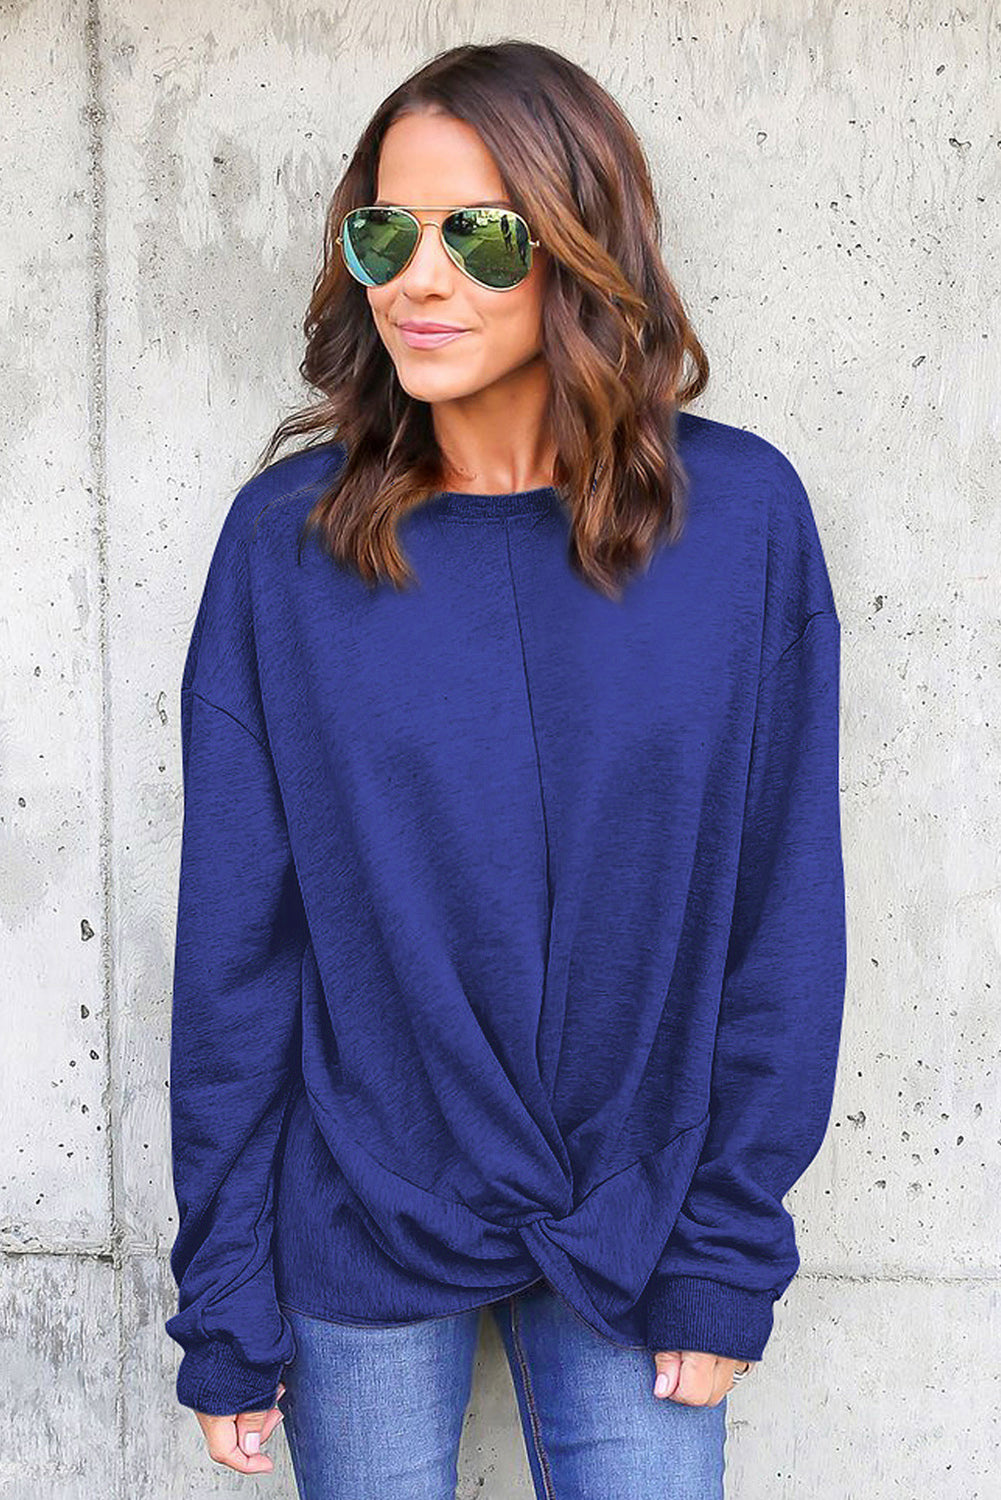 Blue Knot Twist Front Long Sleeve Casual Pullover Sweatshirt Item NO.: 2281